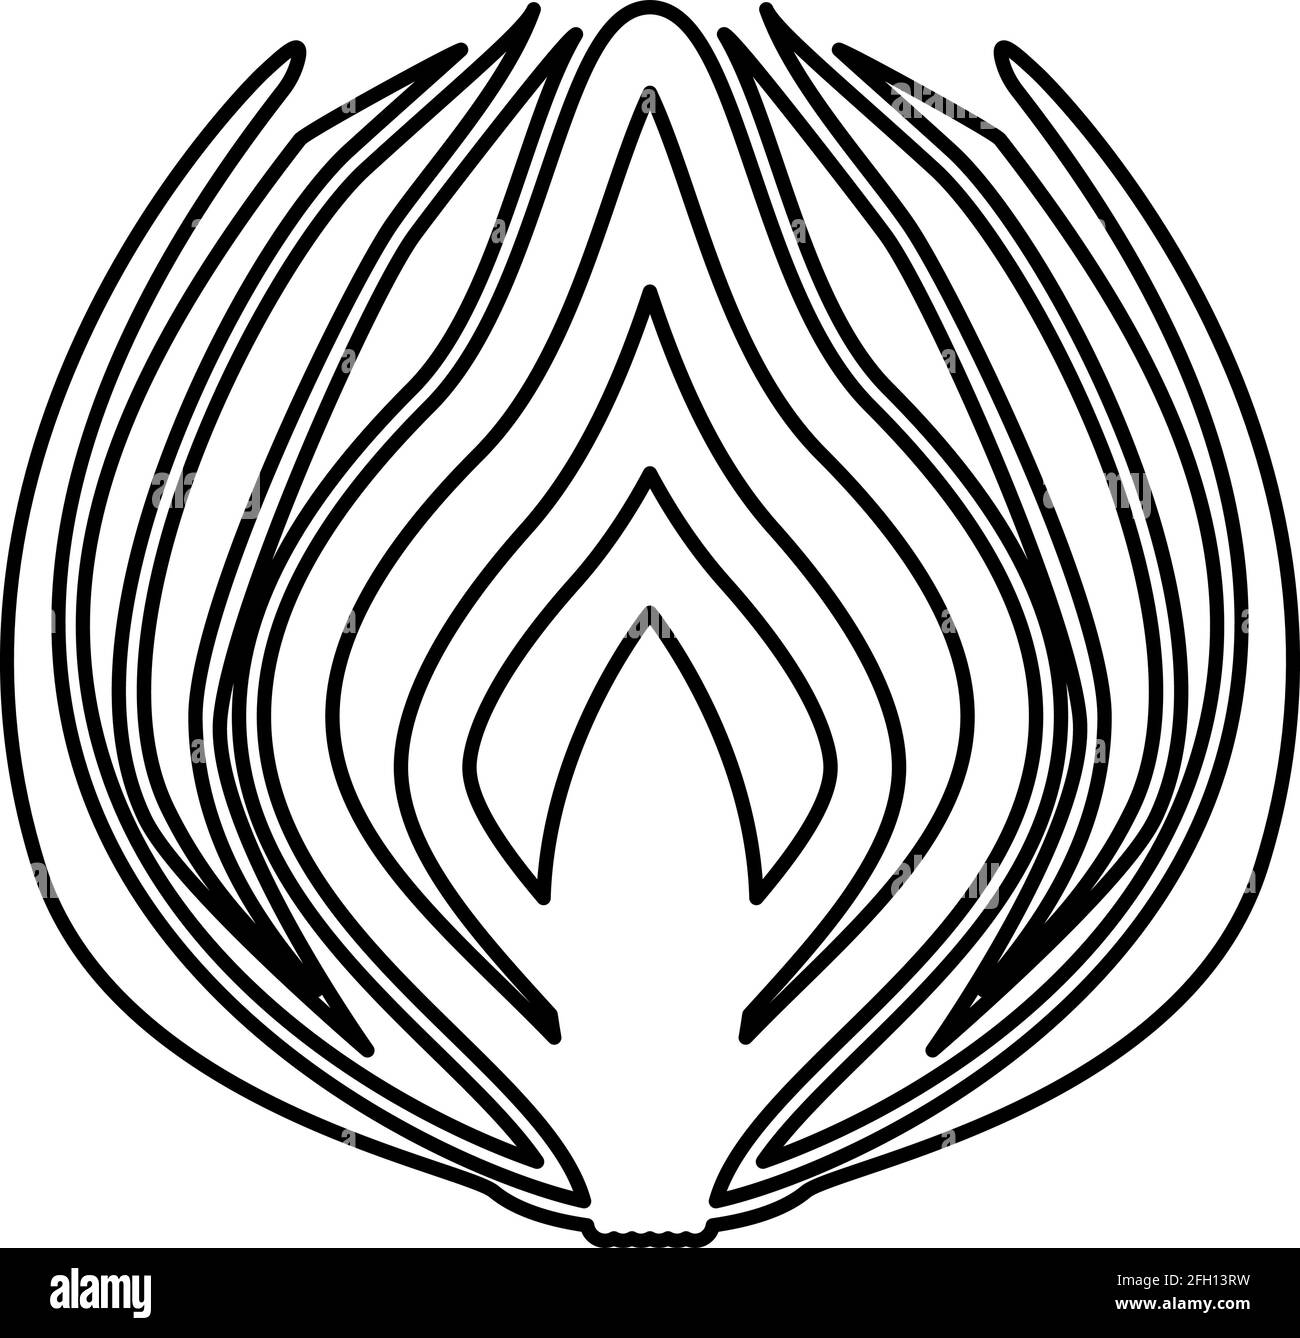 Onion cut in half part Bulbs chopped sliced vegetable contour outline black color vector illustration flat style simple image Stock Vector